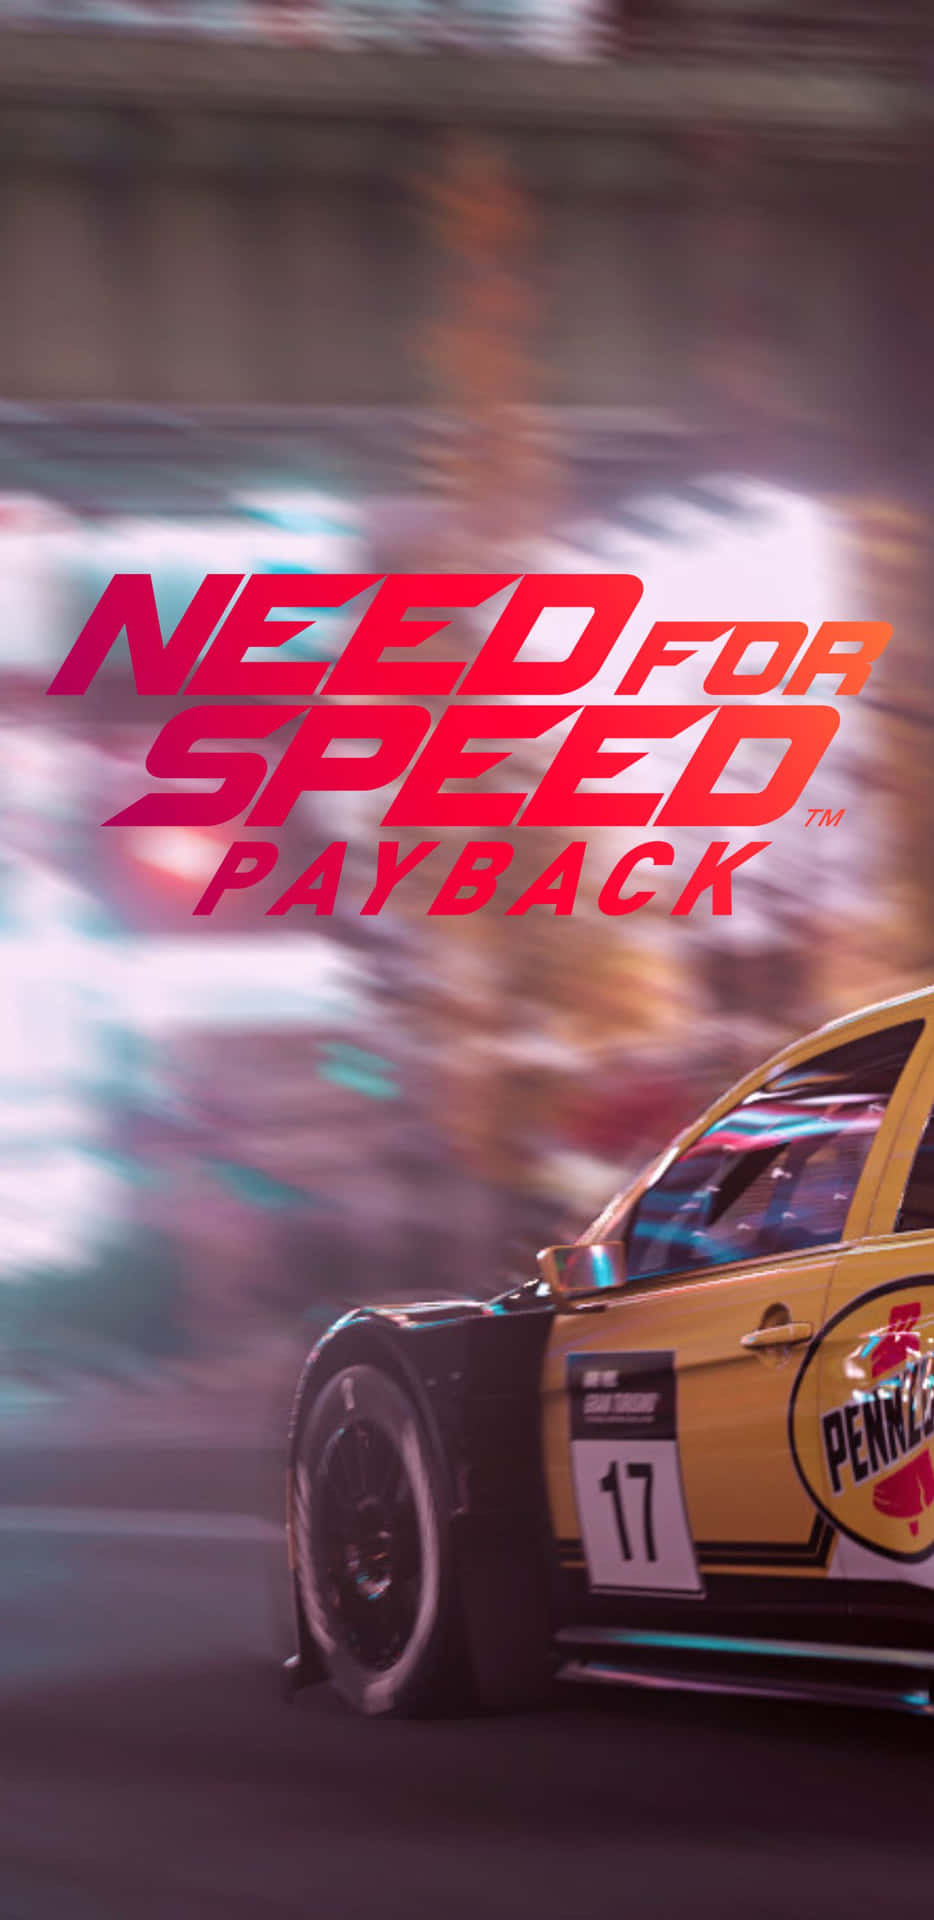 Feel the Rush of Need For Speed: Payback on a Pixel 3xl